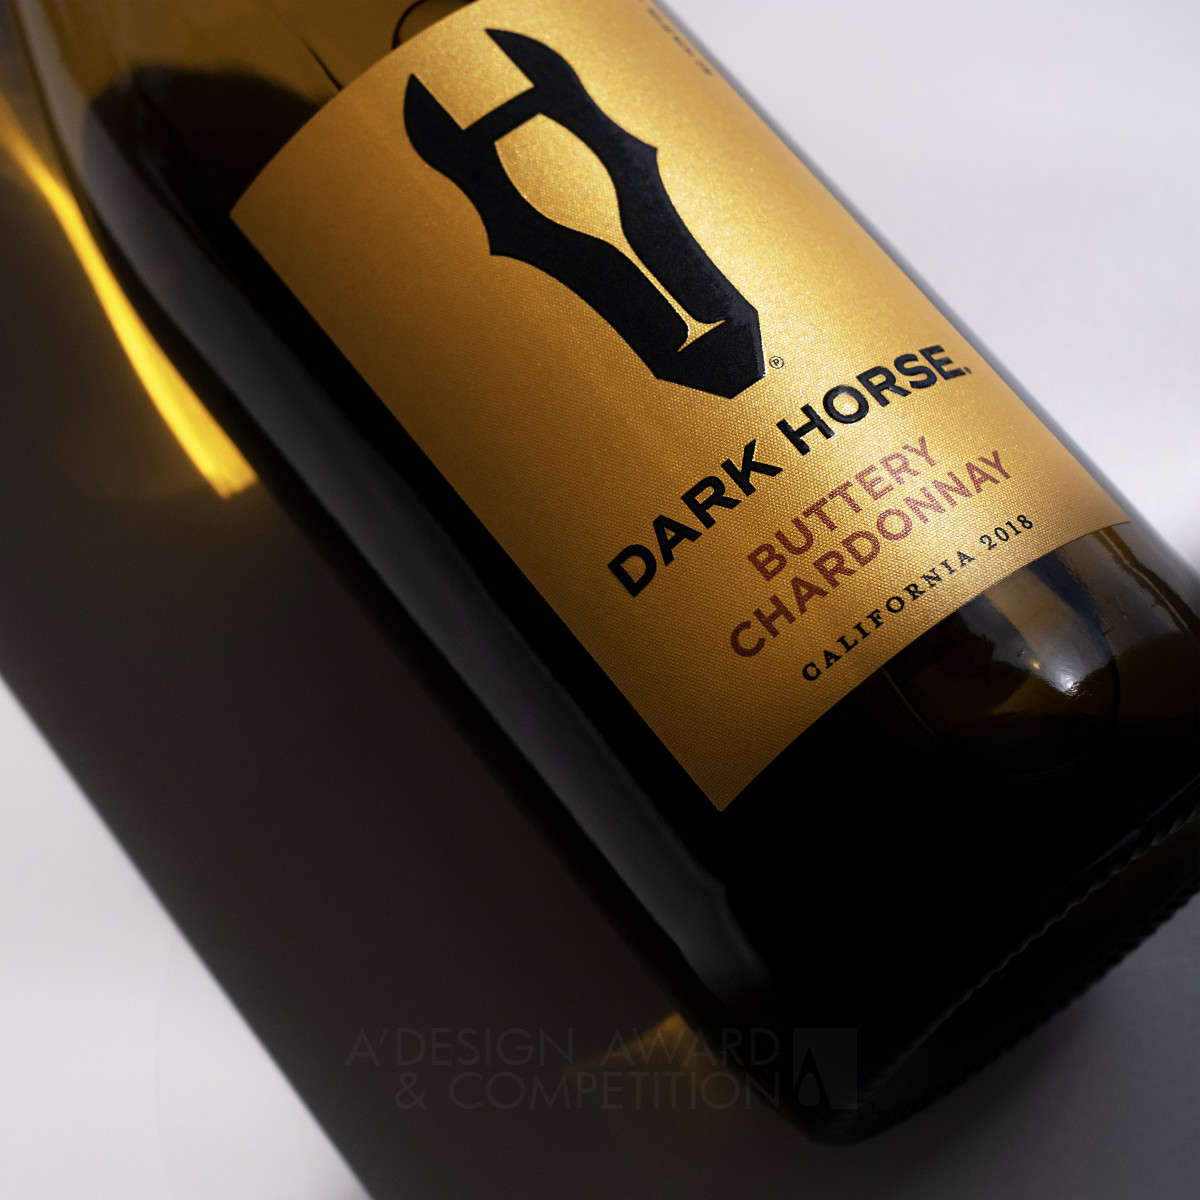 Laurent Hainaut wins Silver at the prestigious A' Packaging Design Award with Dark Horse Wine Branding and Redesign.